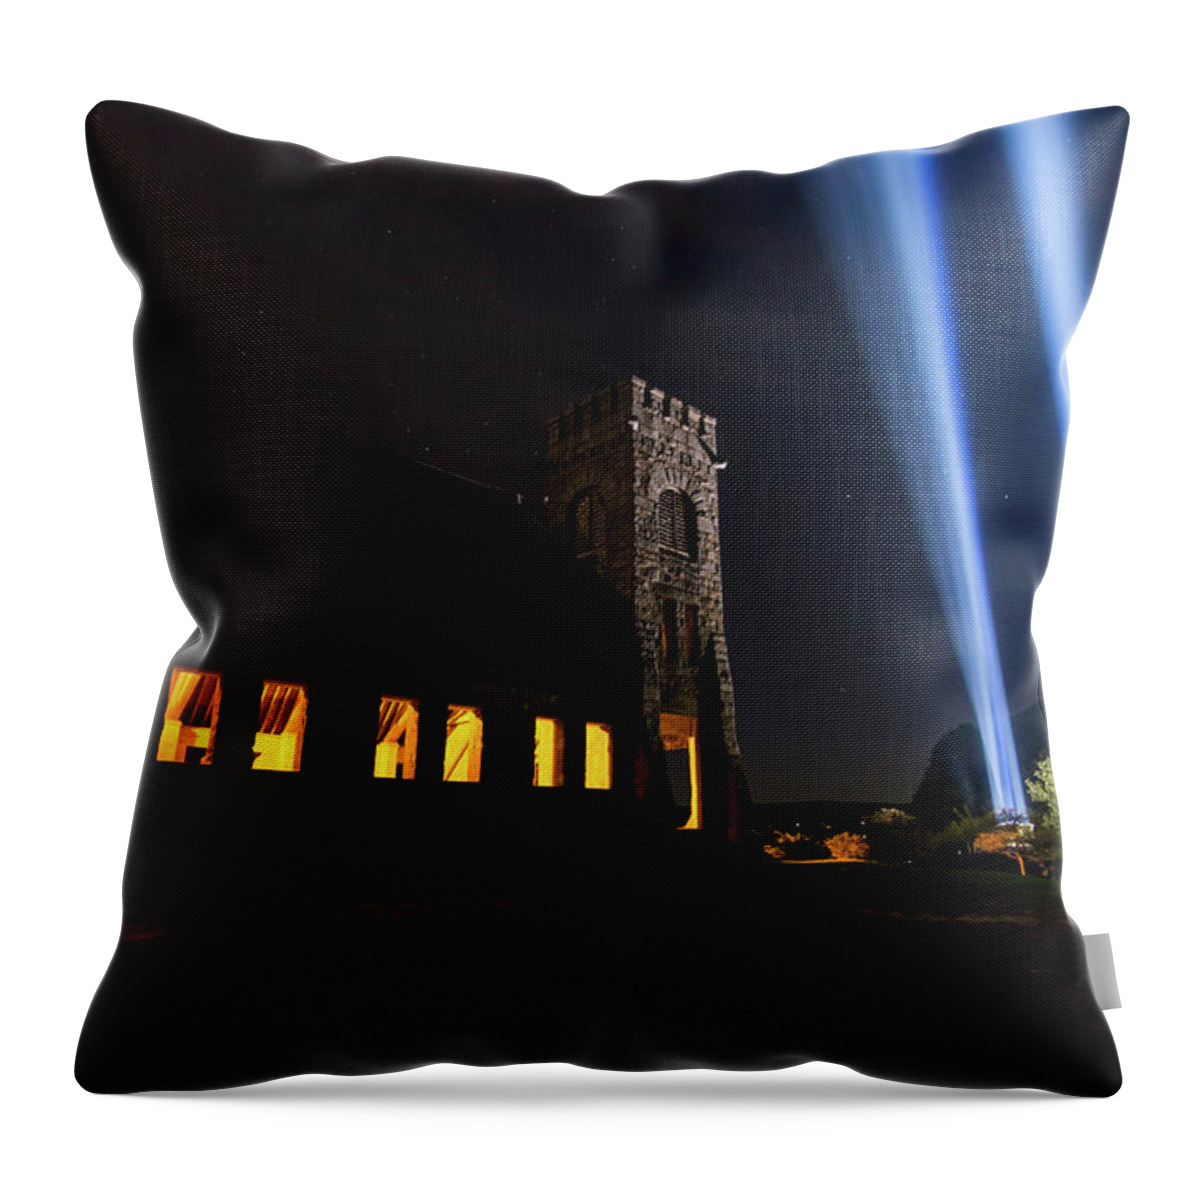 9/11 9-11 911 Nine Eleven Nine-eleven September Eleventh 11 9 West W Boylston Ma Mass Massachusetts Old Stone Church Architecture Lights Beams Light Moon Sky Night Darkness Dark Outside Outdoors Memorial Tribute Trees Wachusett Reservoir New England Newengland U.s.a. Usa Brian Hale Brianhalephoto Clouds Throw Pillow featuring the photograph 9/11 Memorial uo close 2 by Brian Hale